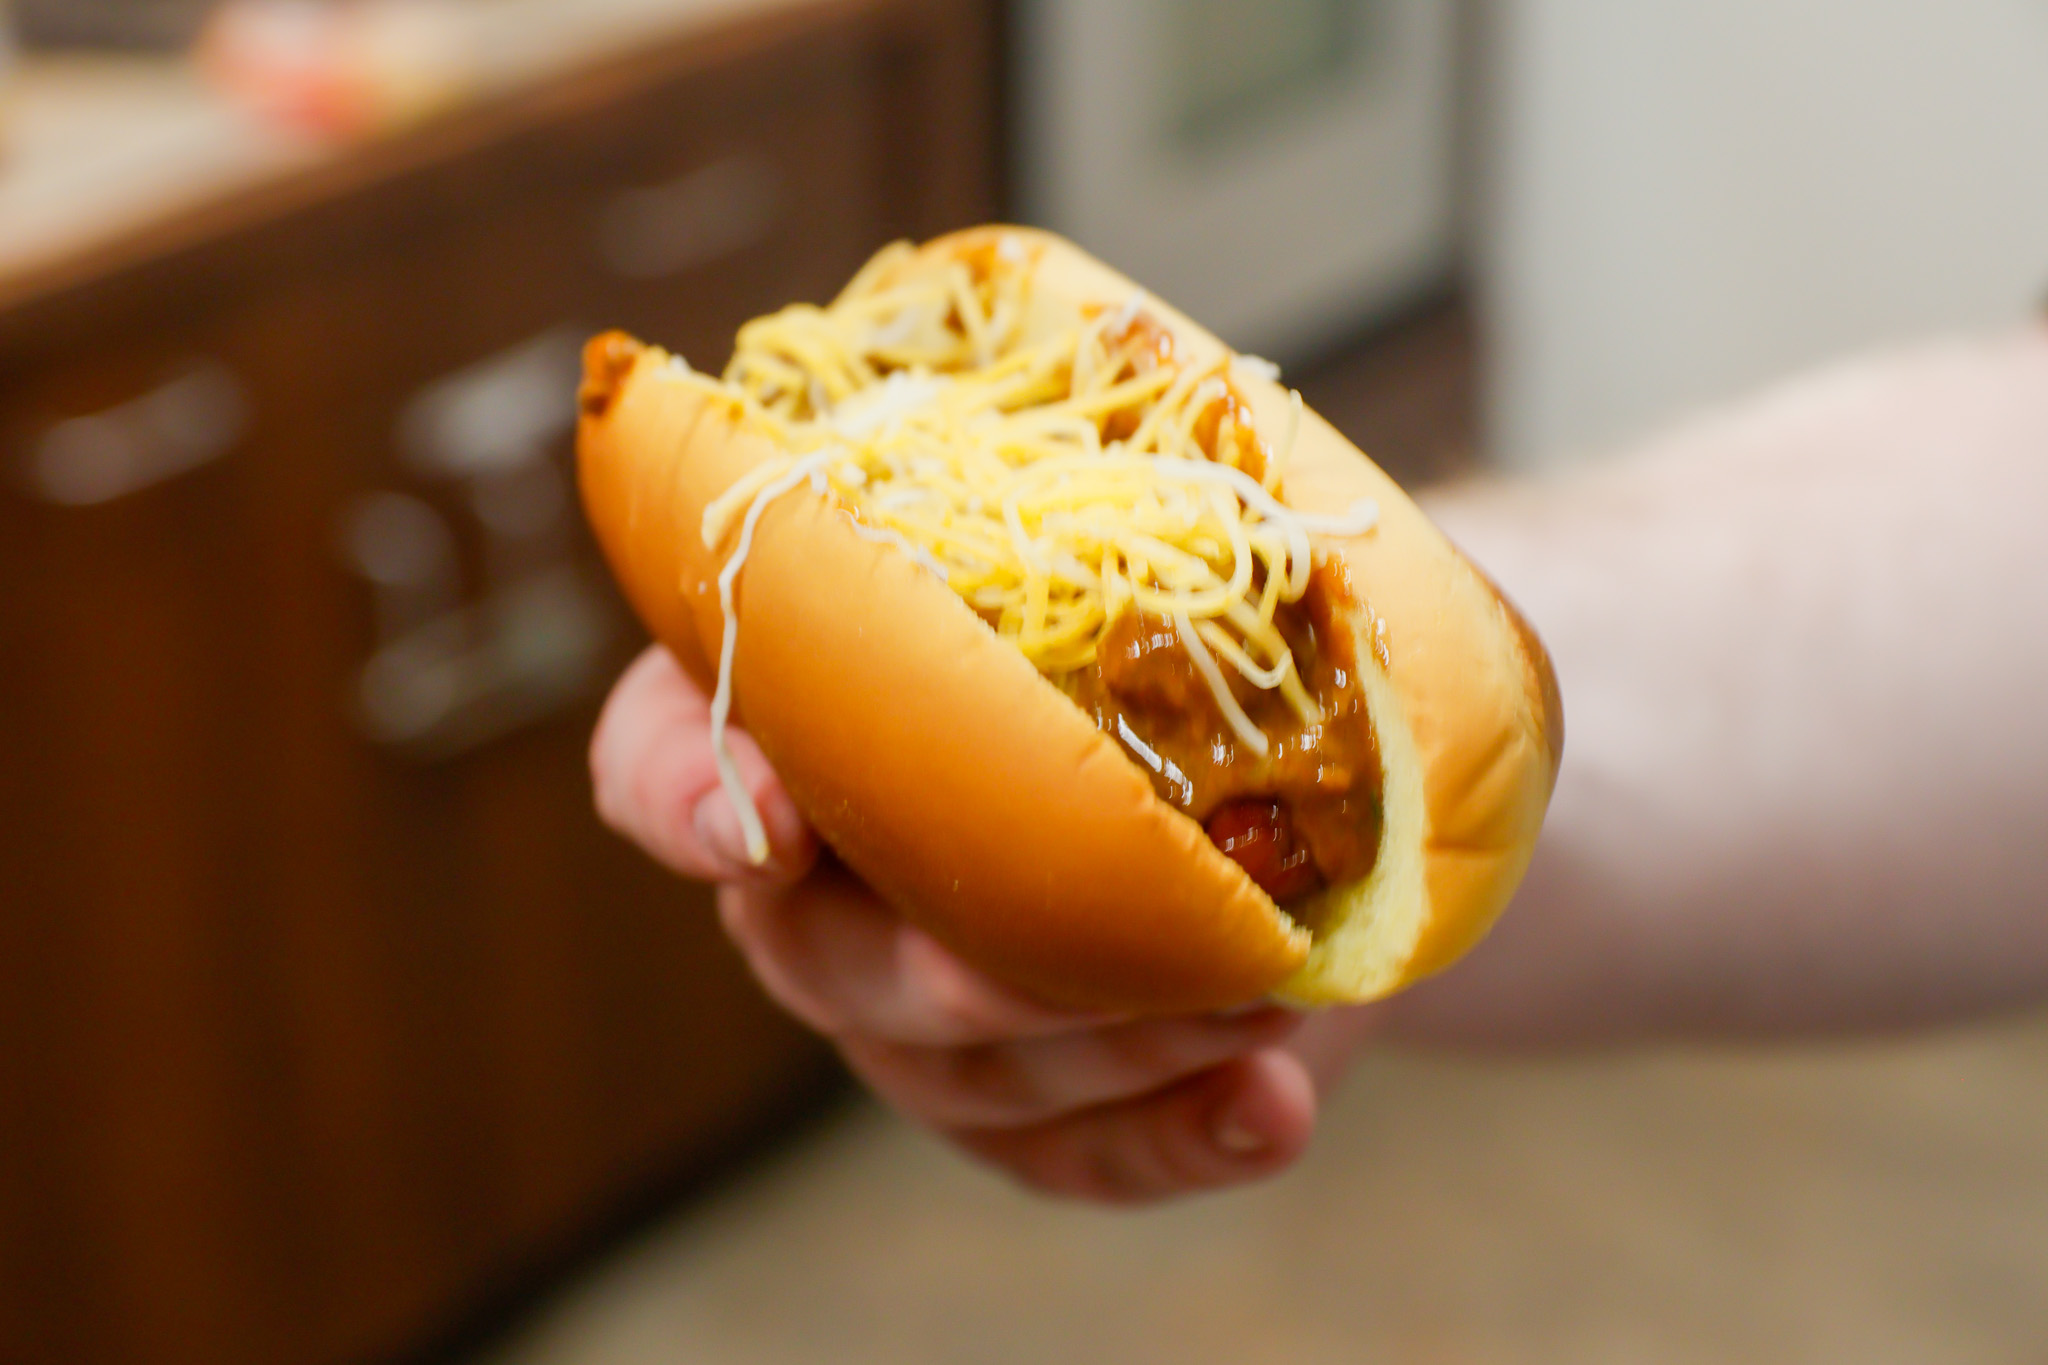 Just when you think a hot dog couldn't get better, it gets topped with chili and cheese
Sal DiMaggio | The Montclarion.